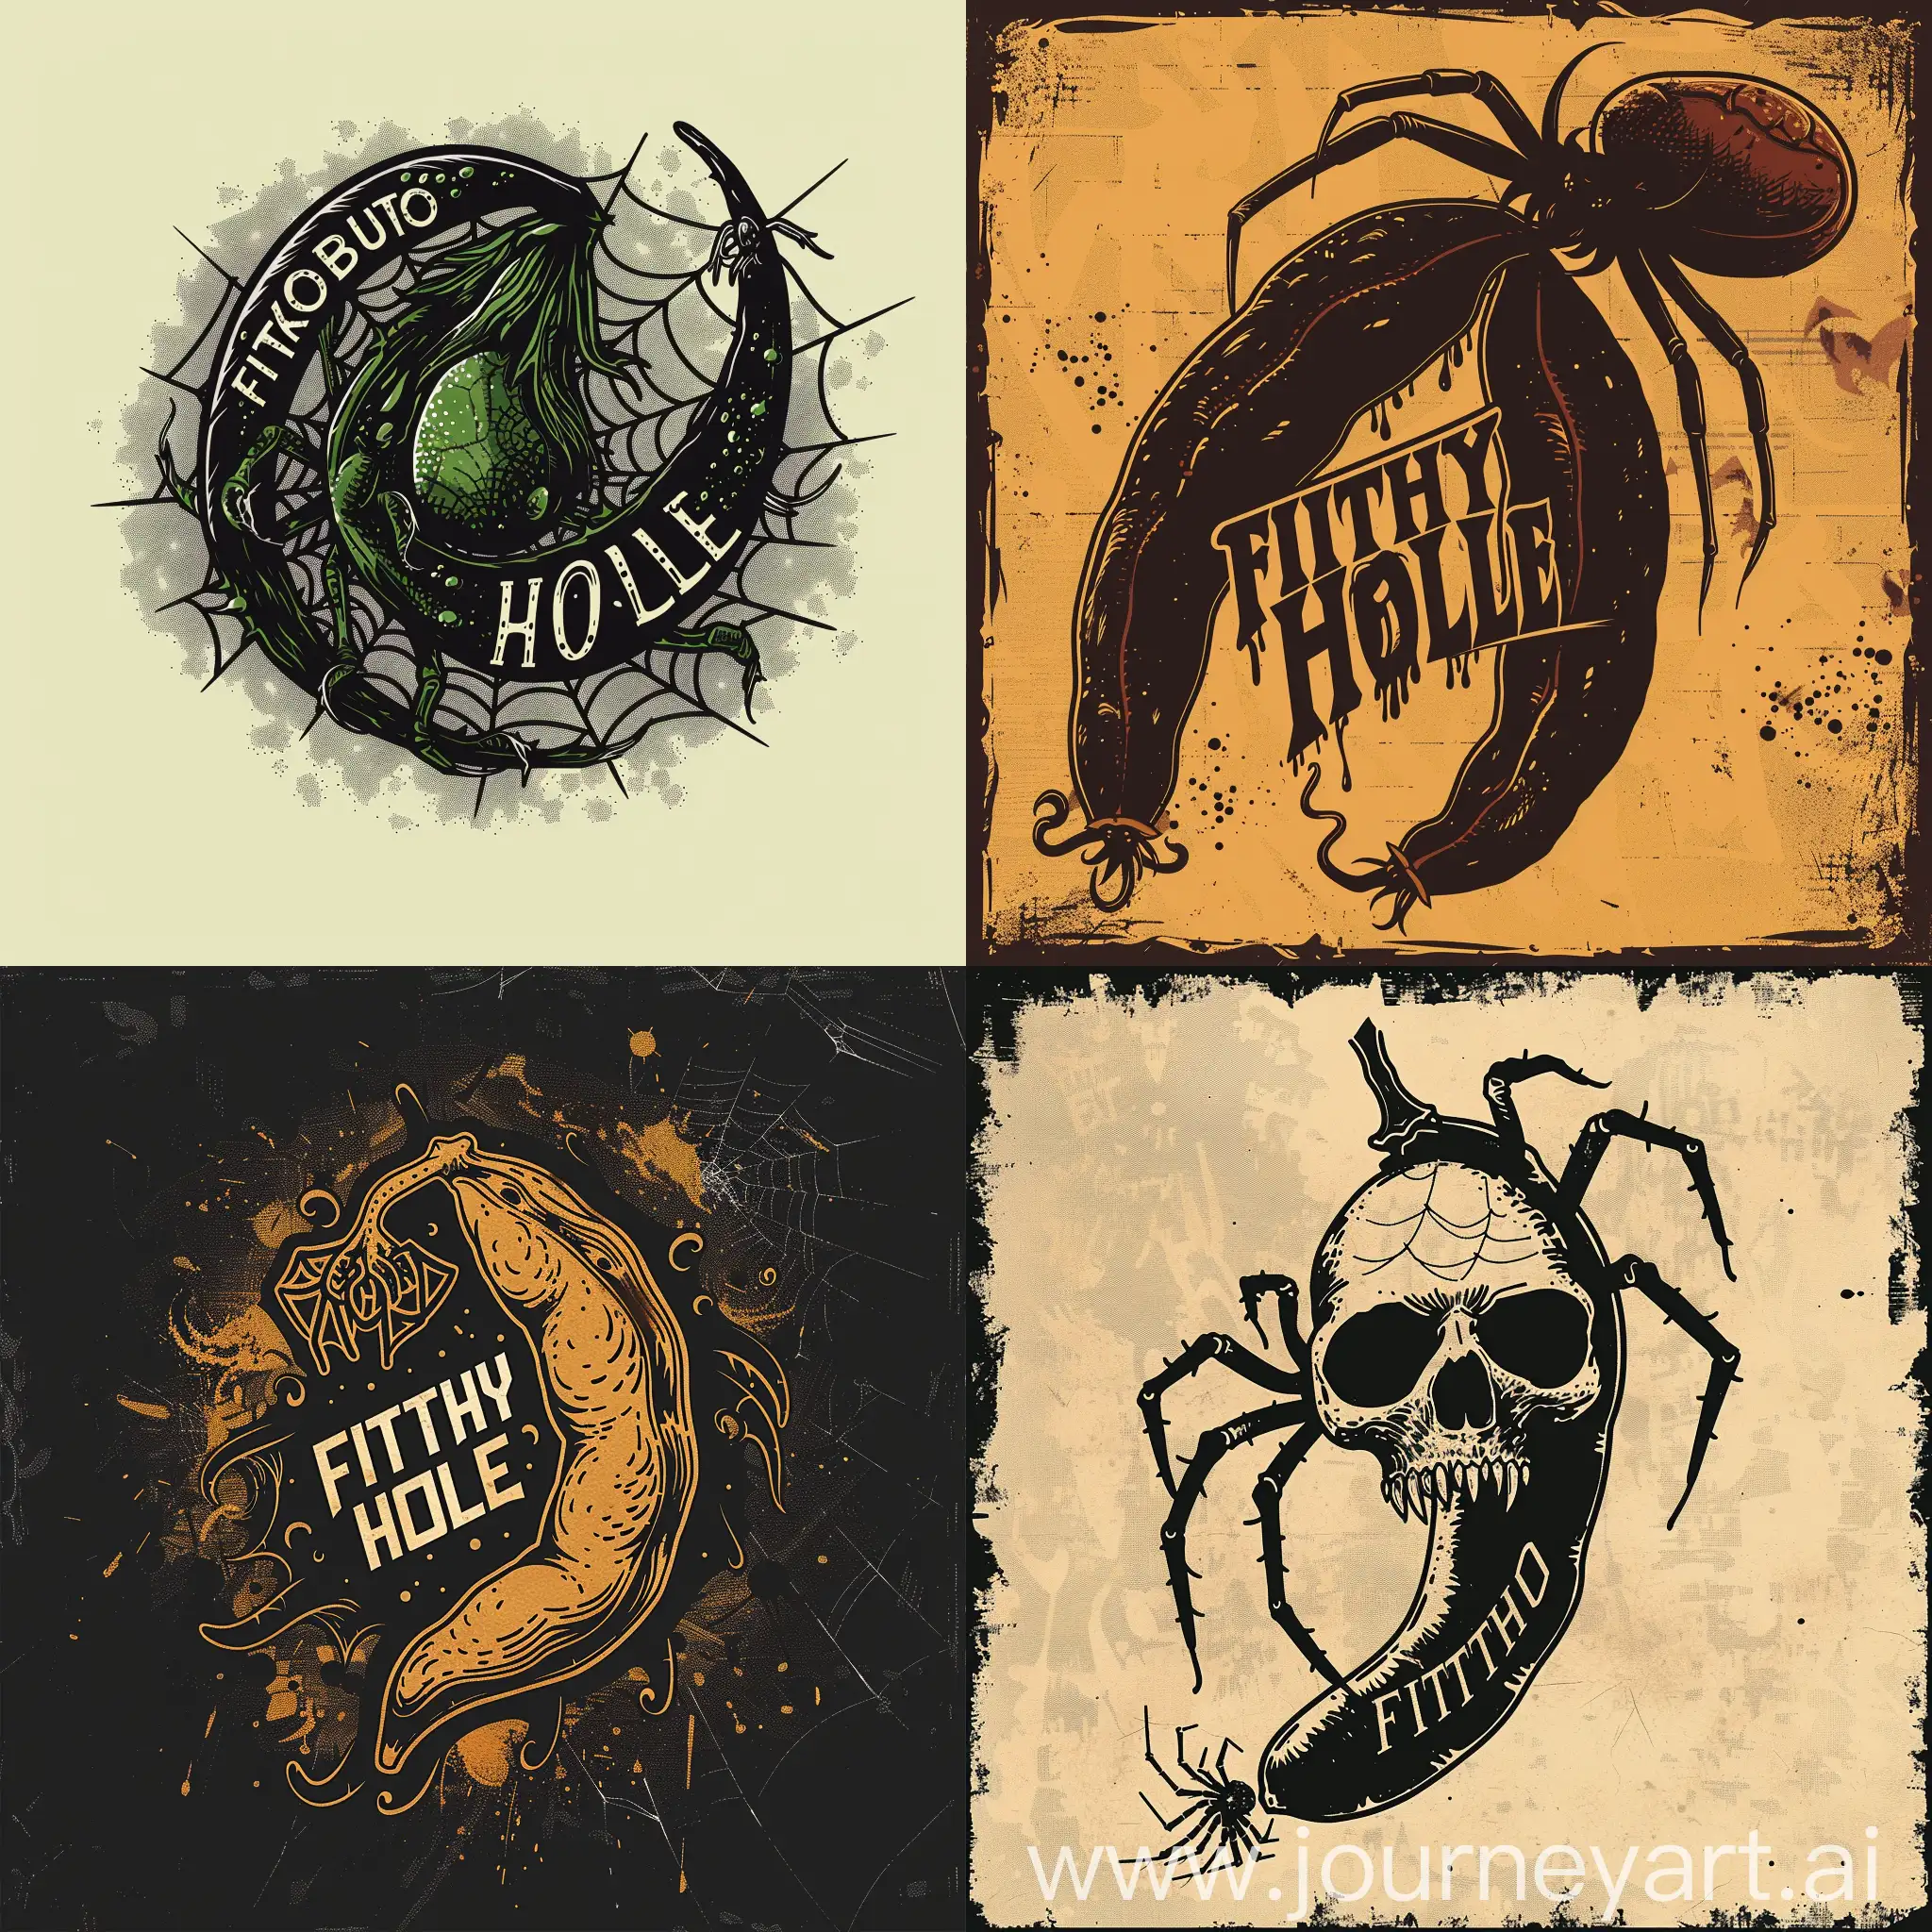 "FILTHY H0LE" in Eskorbuto logo typo and a spider bean. Punk